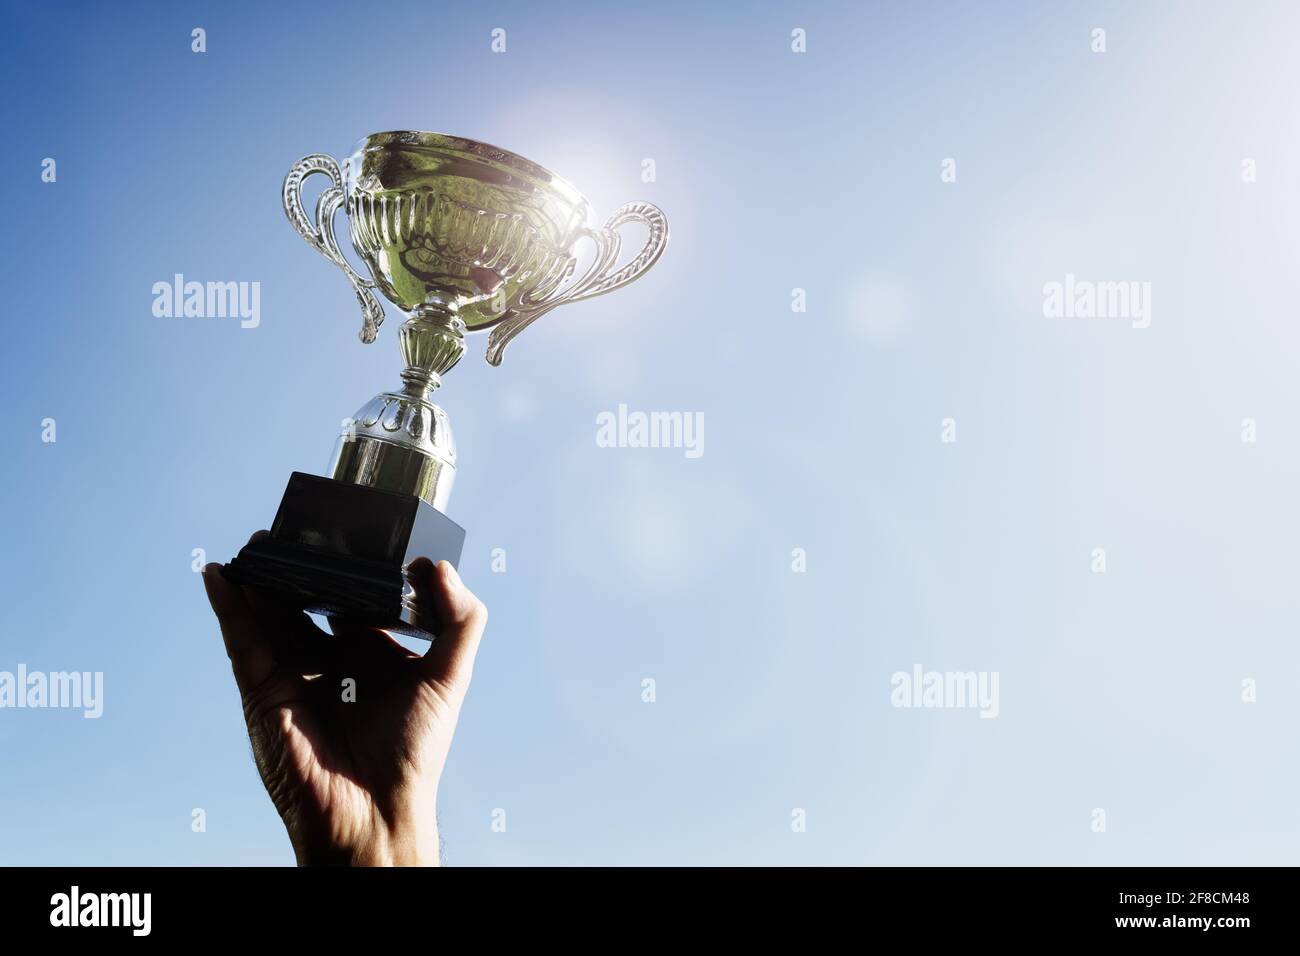 Celebrating with trophy award for success or first place sporting championship win Stock Photo